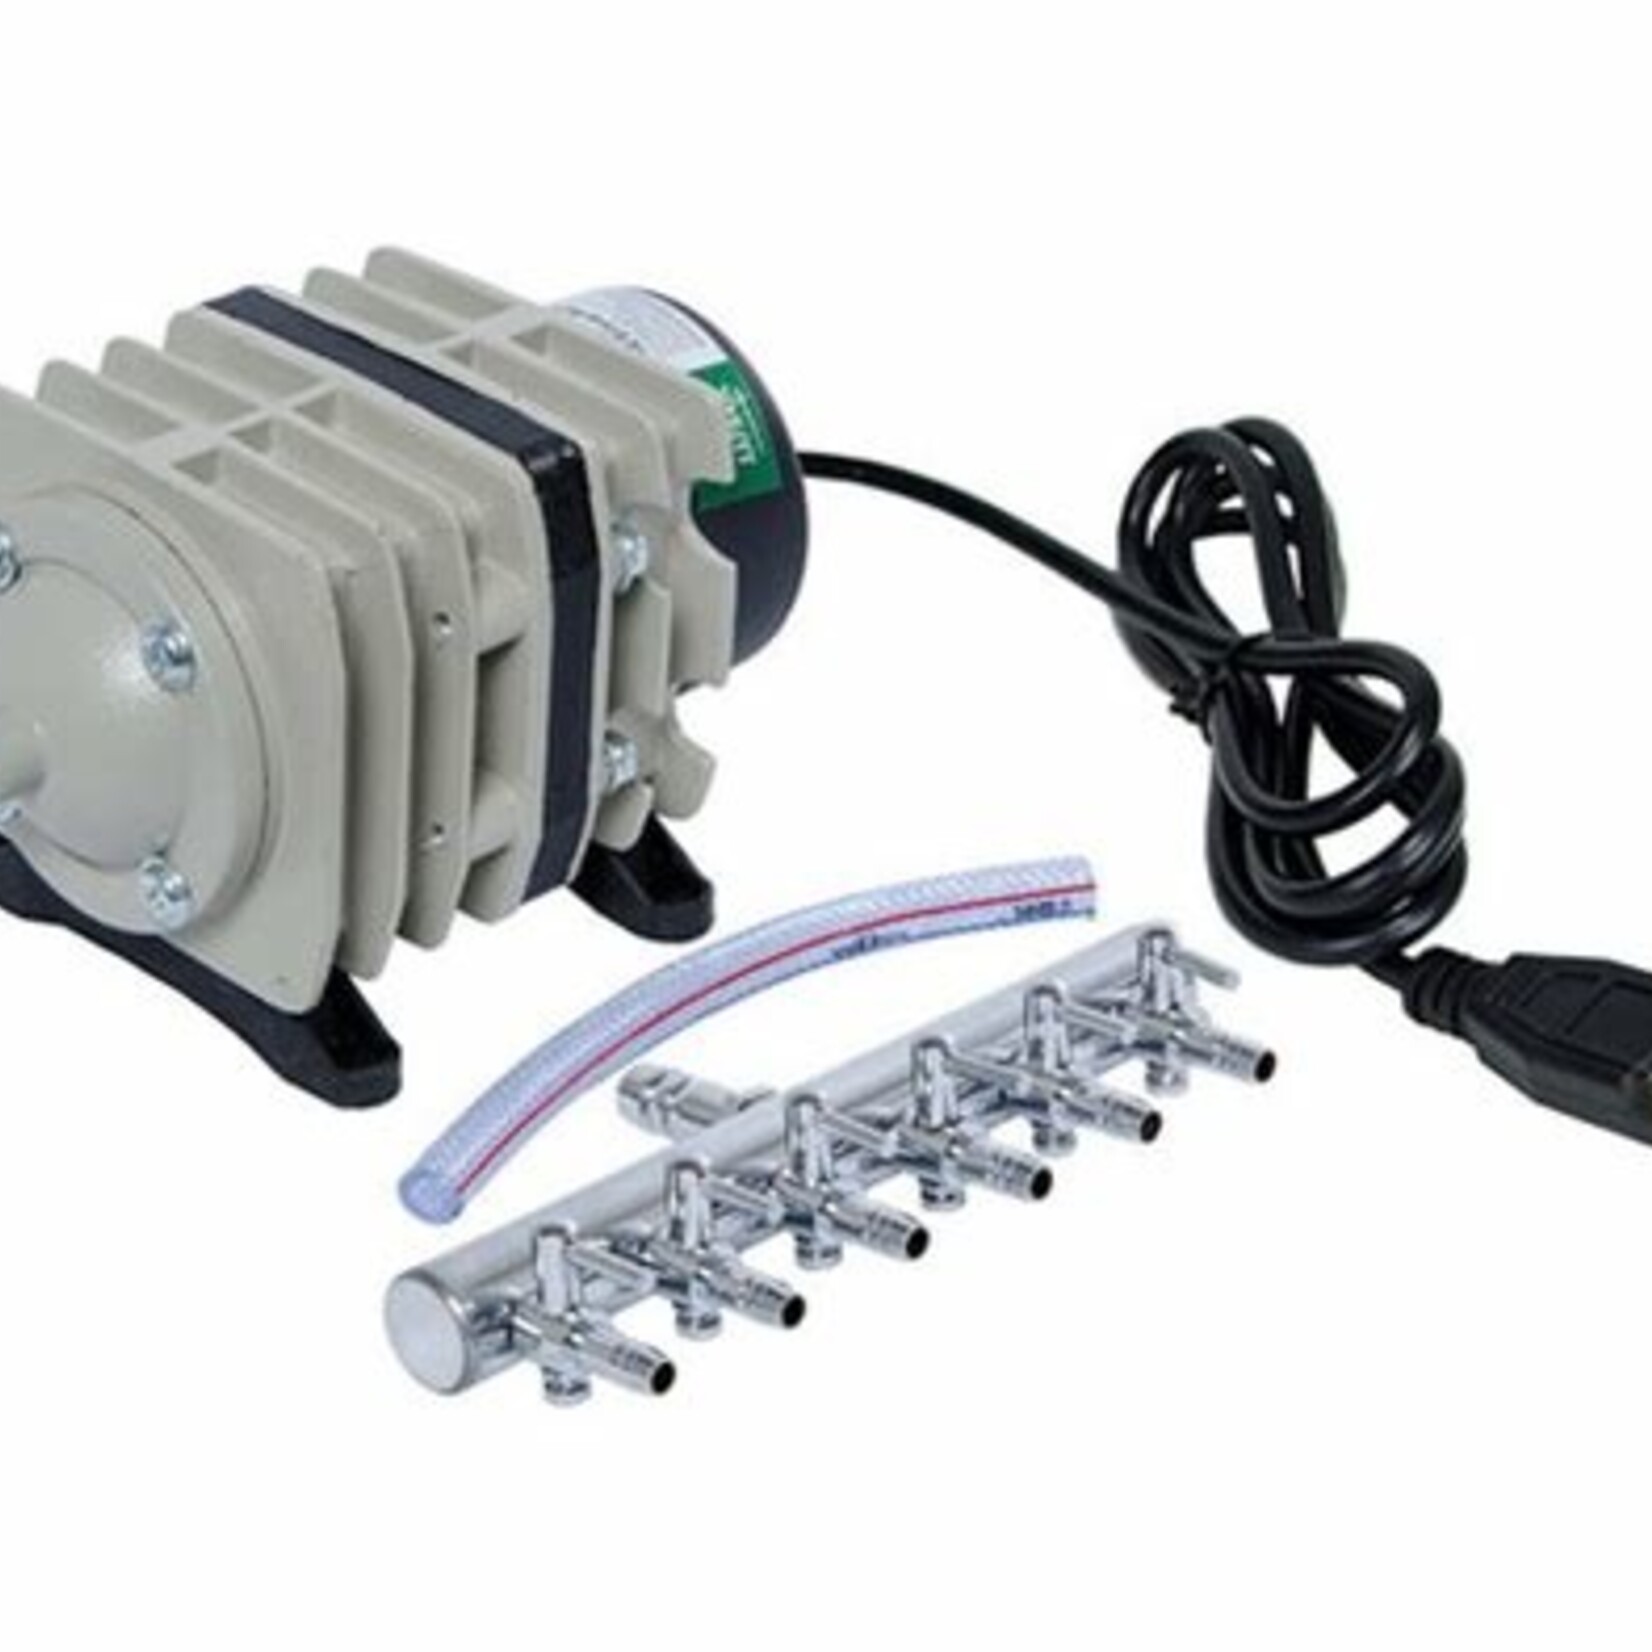 Active Air Commercial Air Pump with 8 outlets, 70 lt per minute